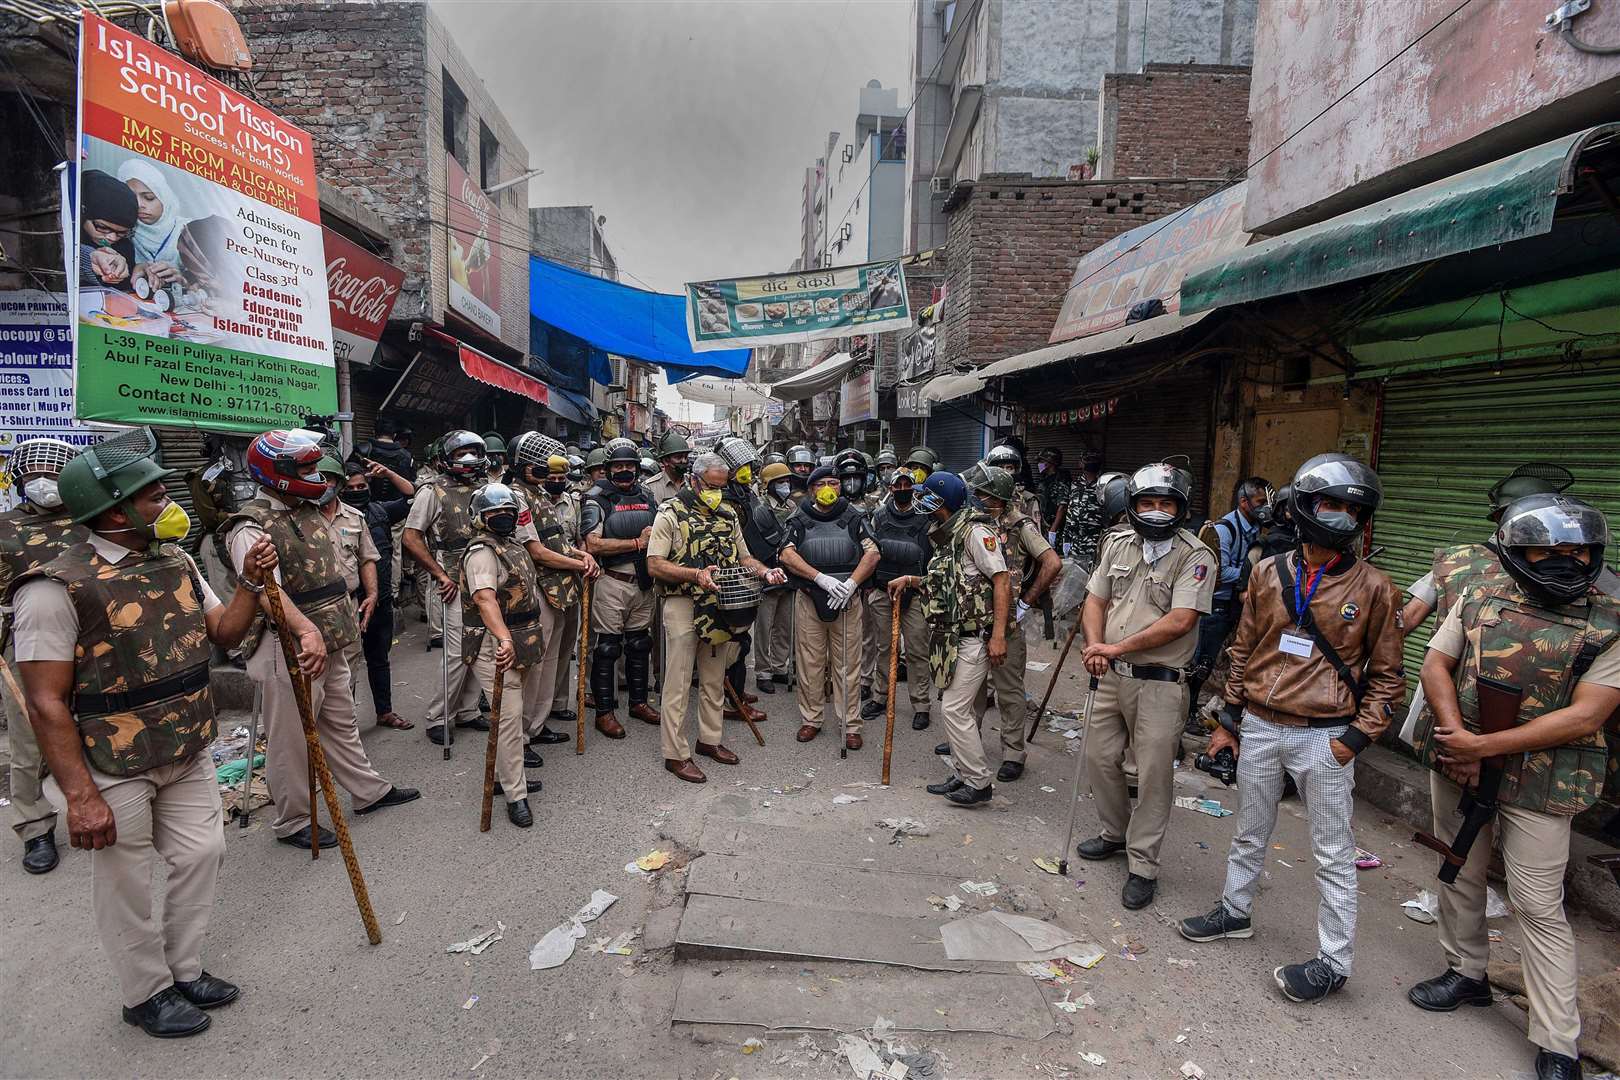 Heavy police deployment in New Delhi, India after authorities cleared protestors in the wake of coronavirus outbreak. Photo from PA Wire/Hindustan Times/SIPA USA.